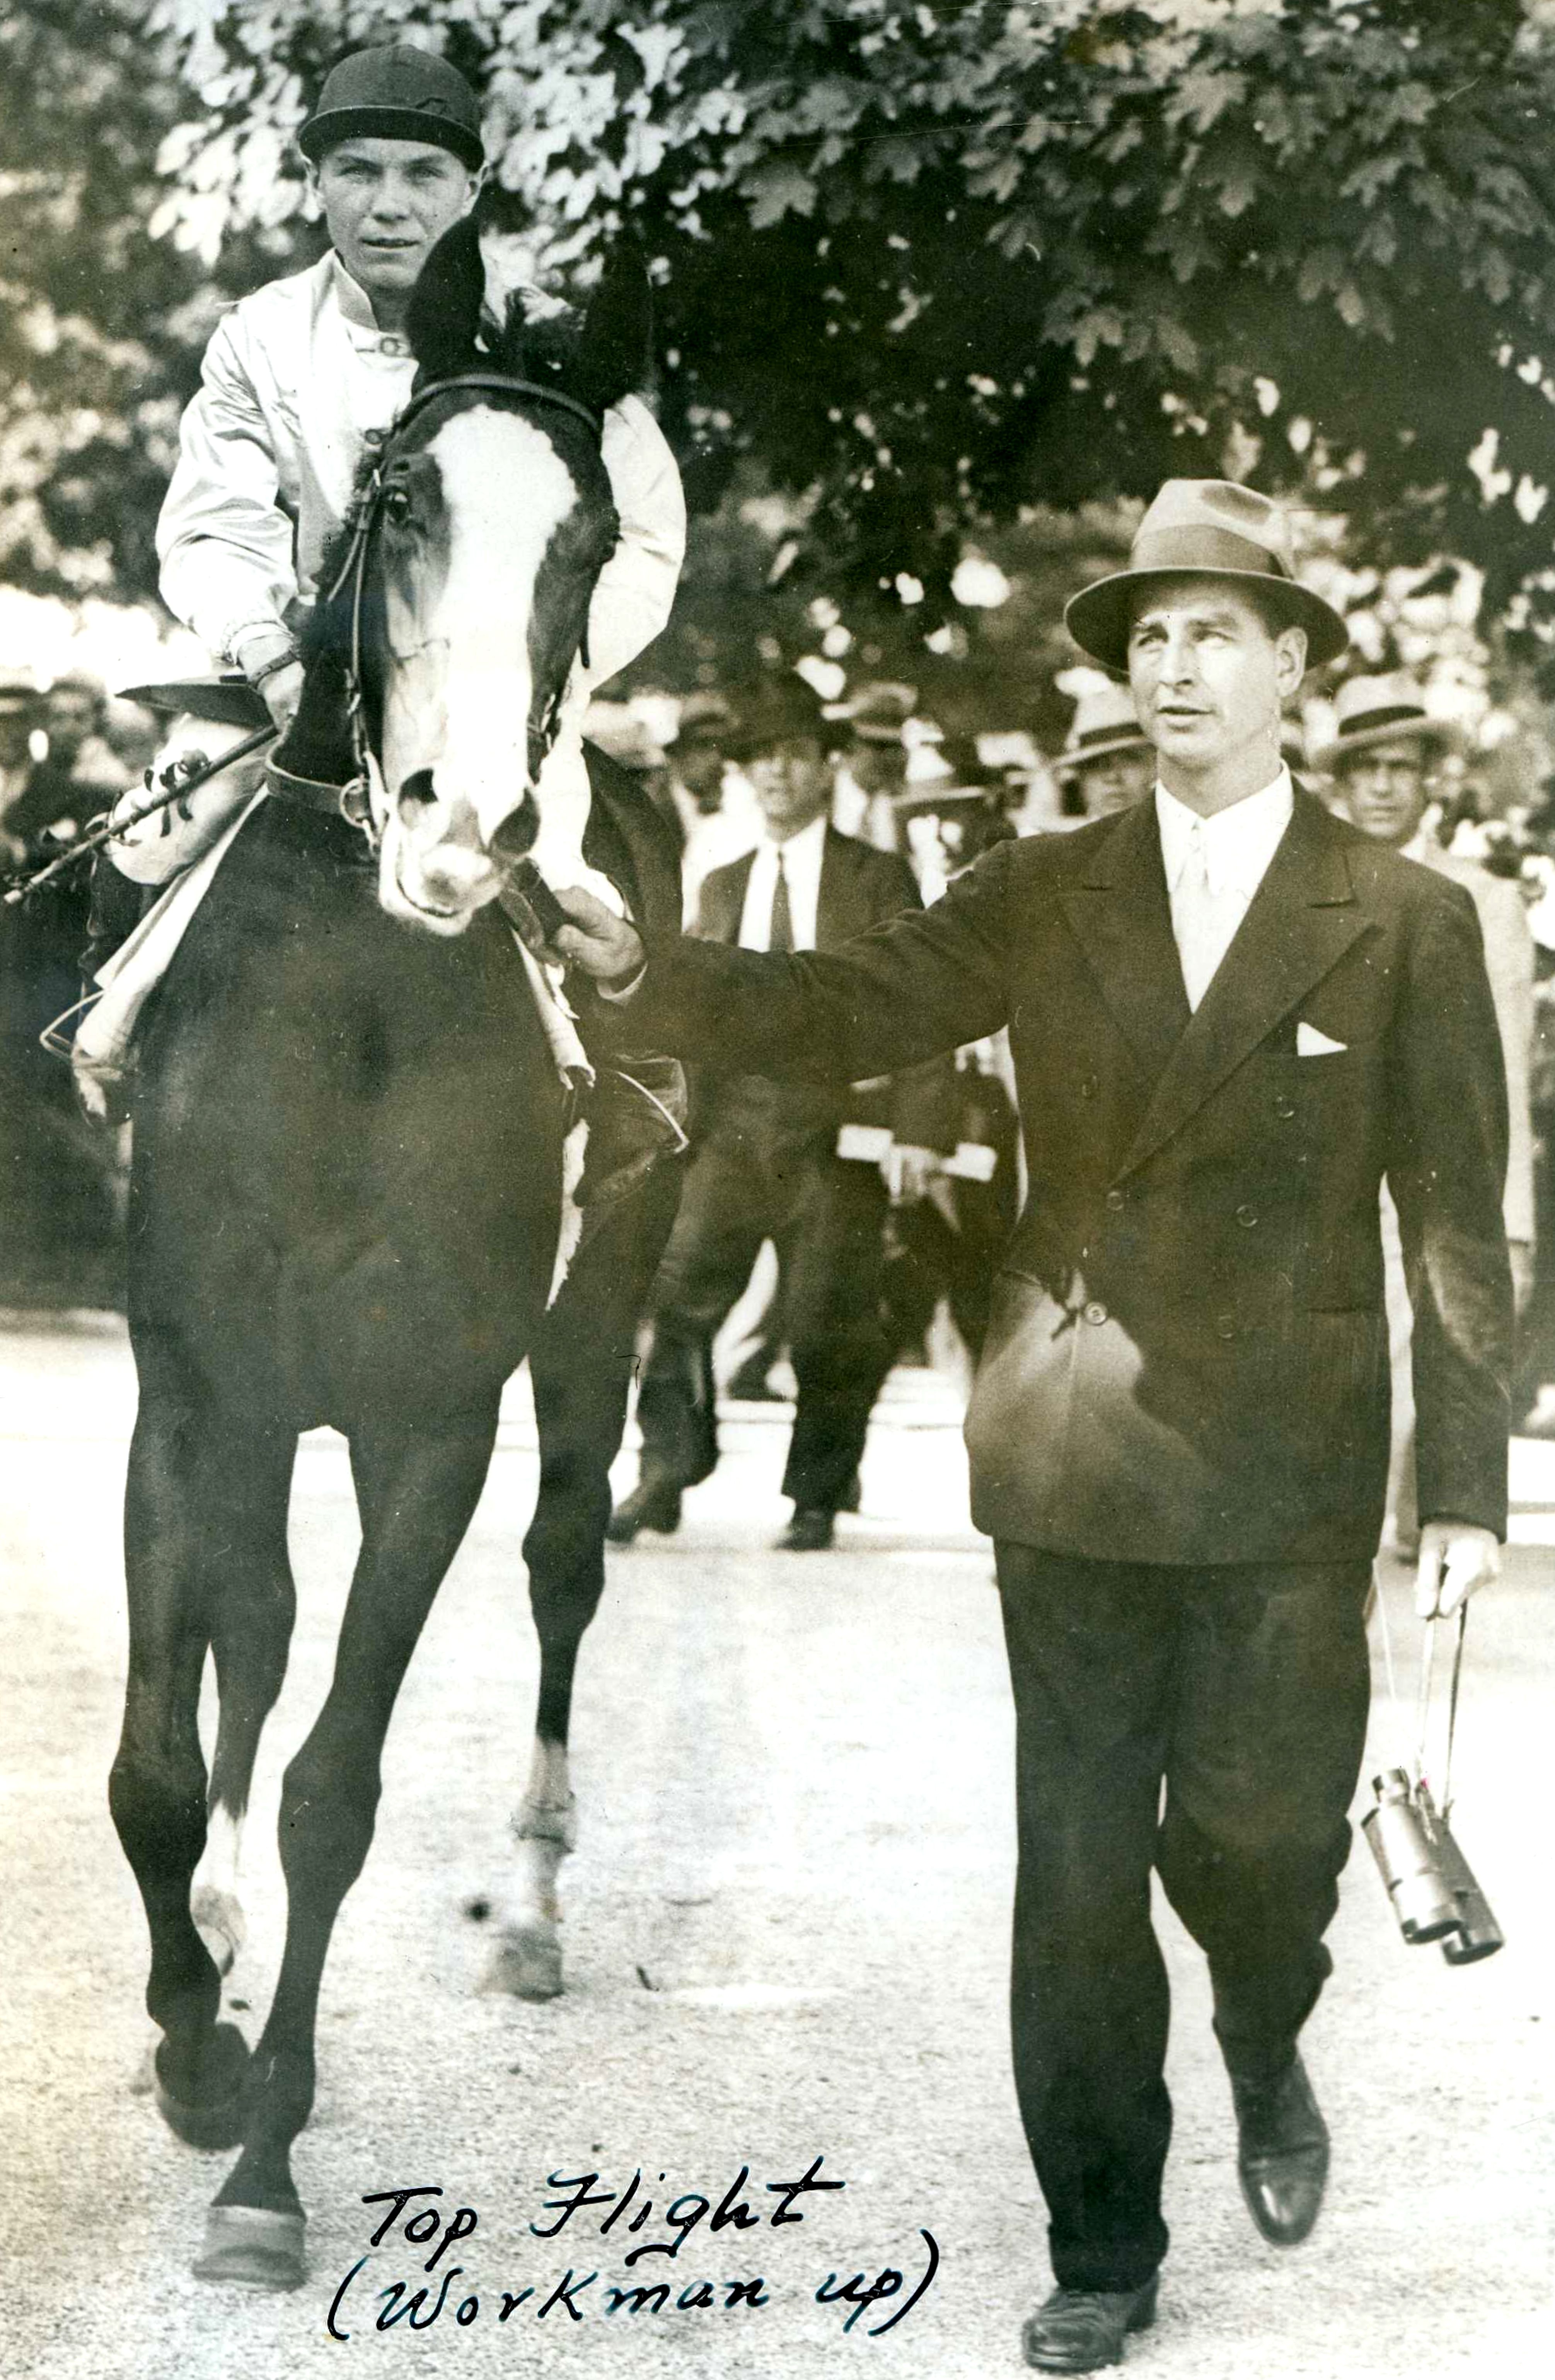 C. V. Whitney leads Top Flight (Raymond Workman up) out of the paddock (Museum Collection)